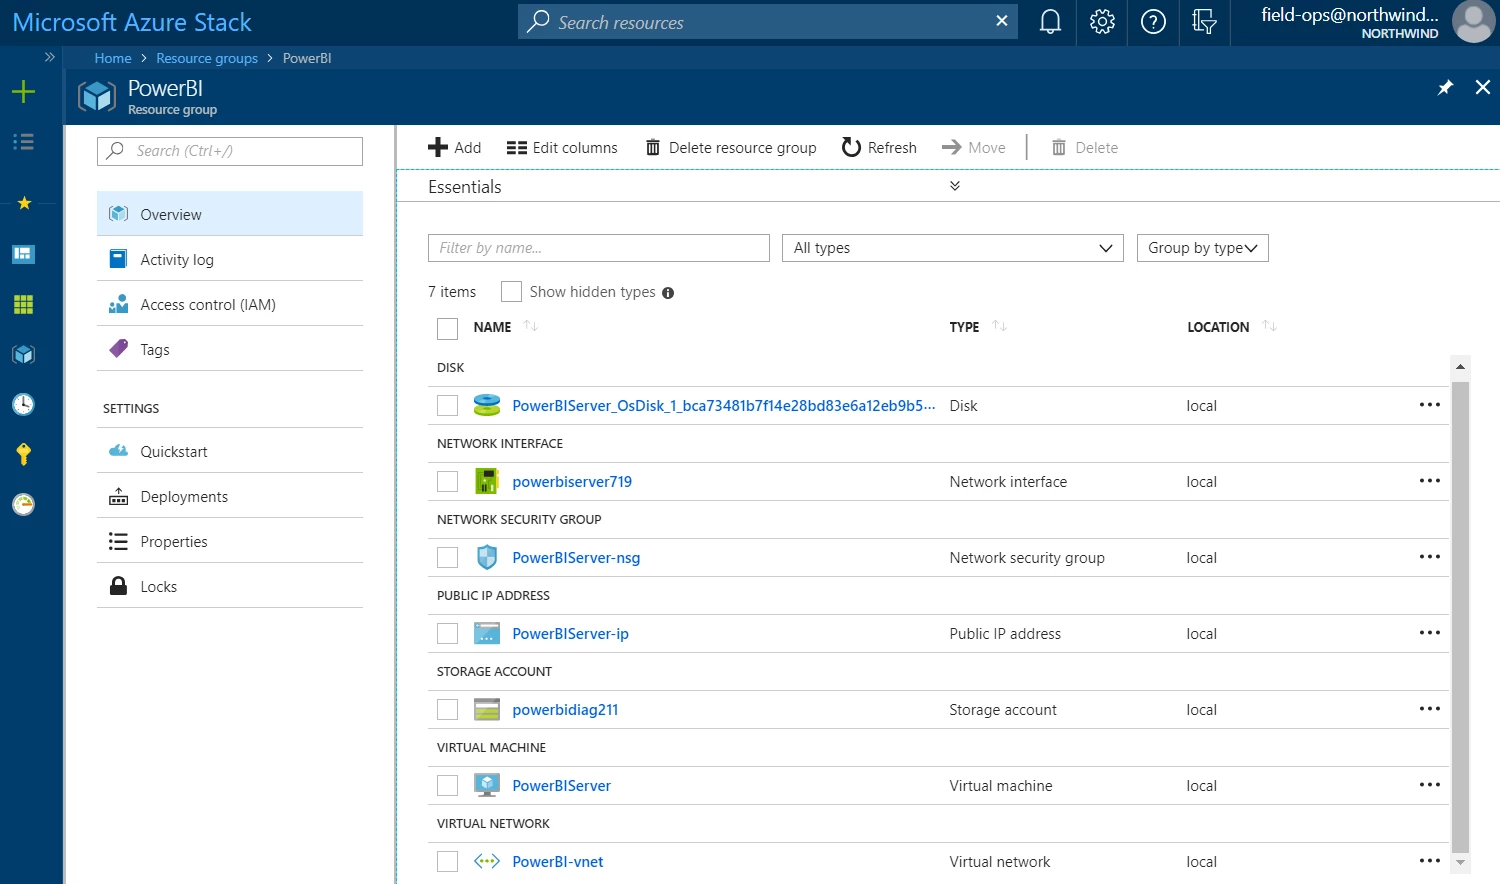 Full software defined infrastructure in the Azure Stack portal